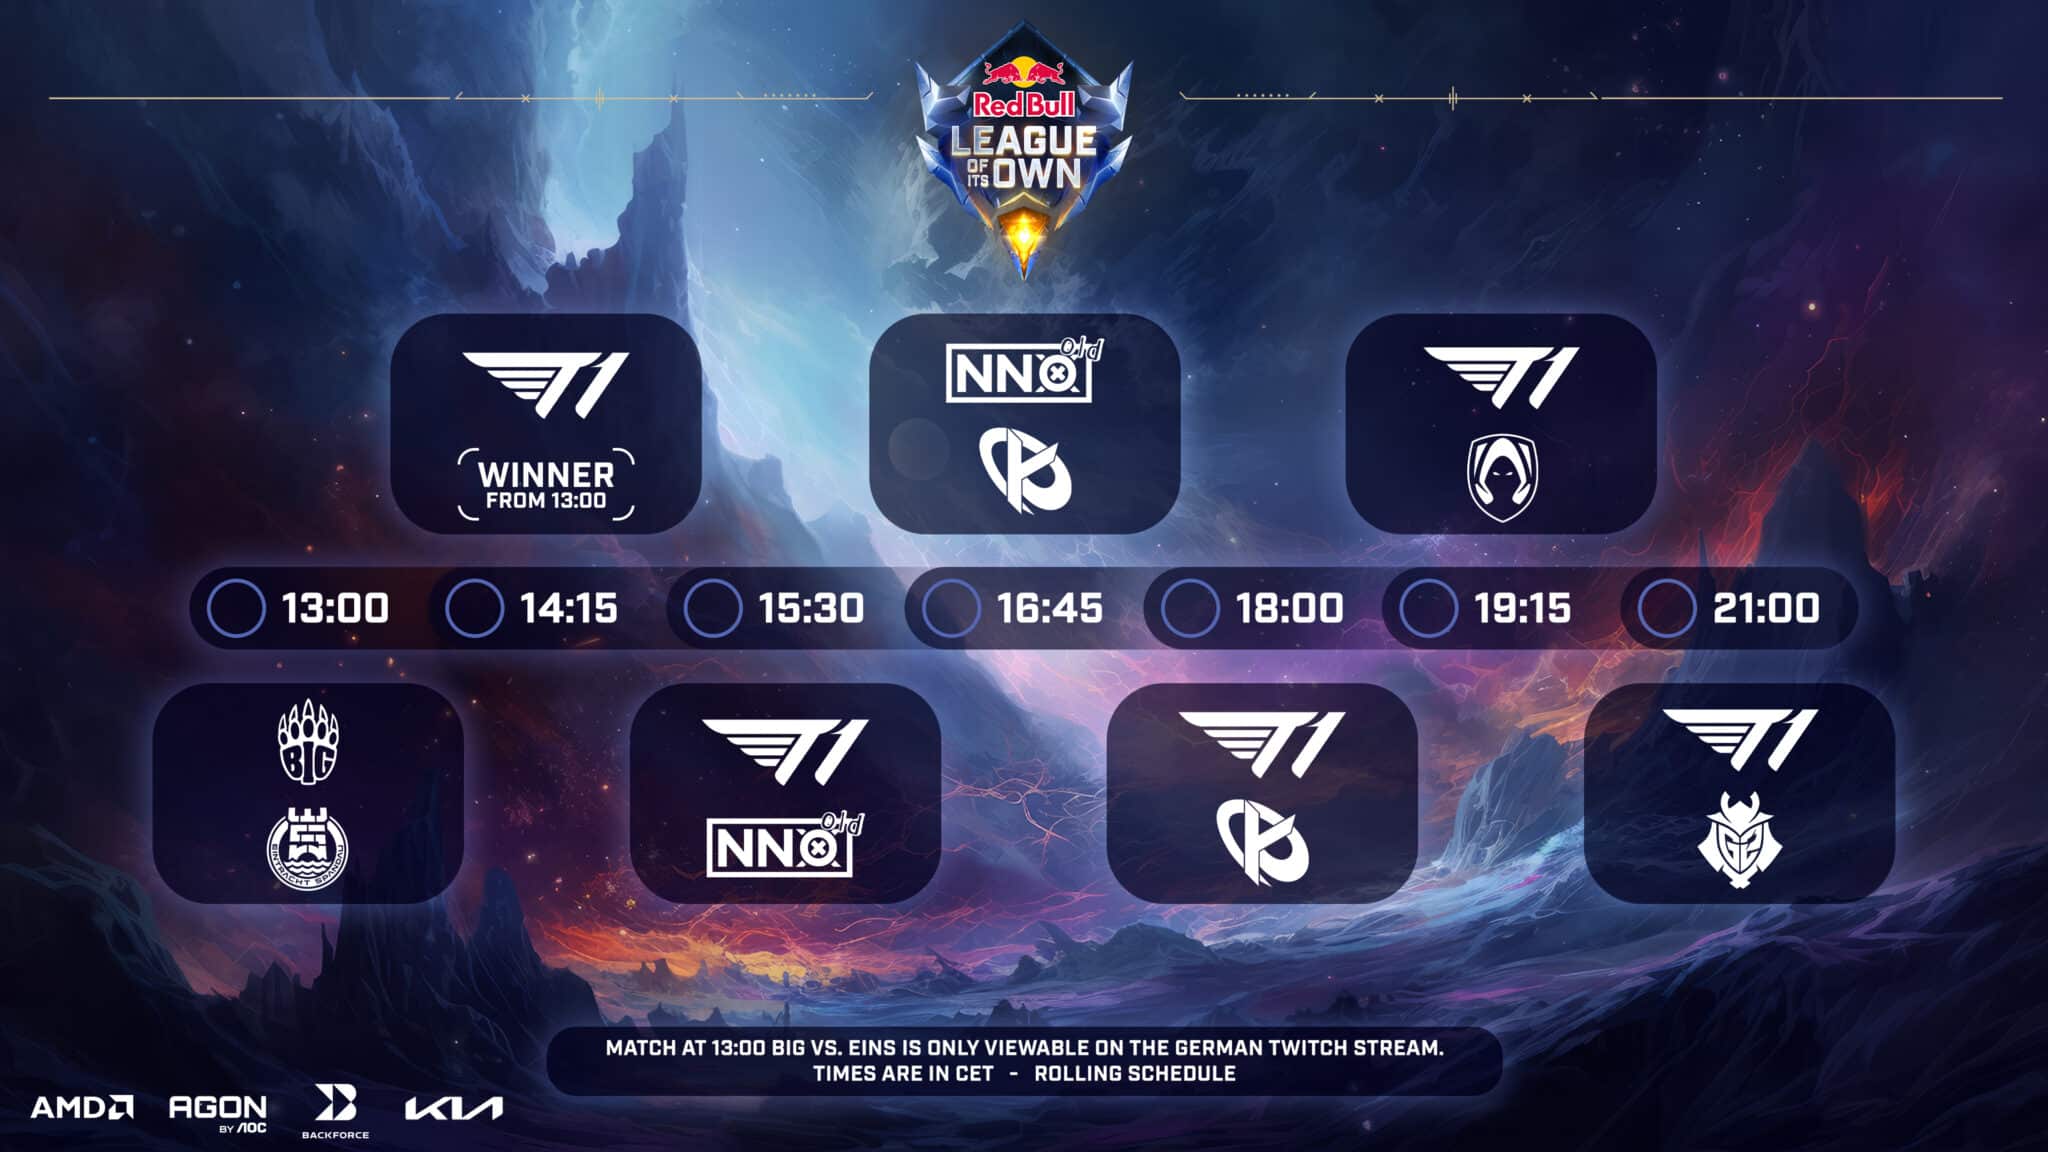 League of its own Redbull schedule